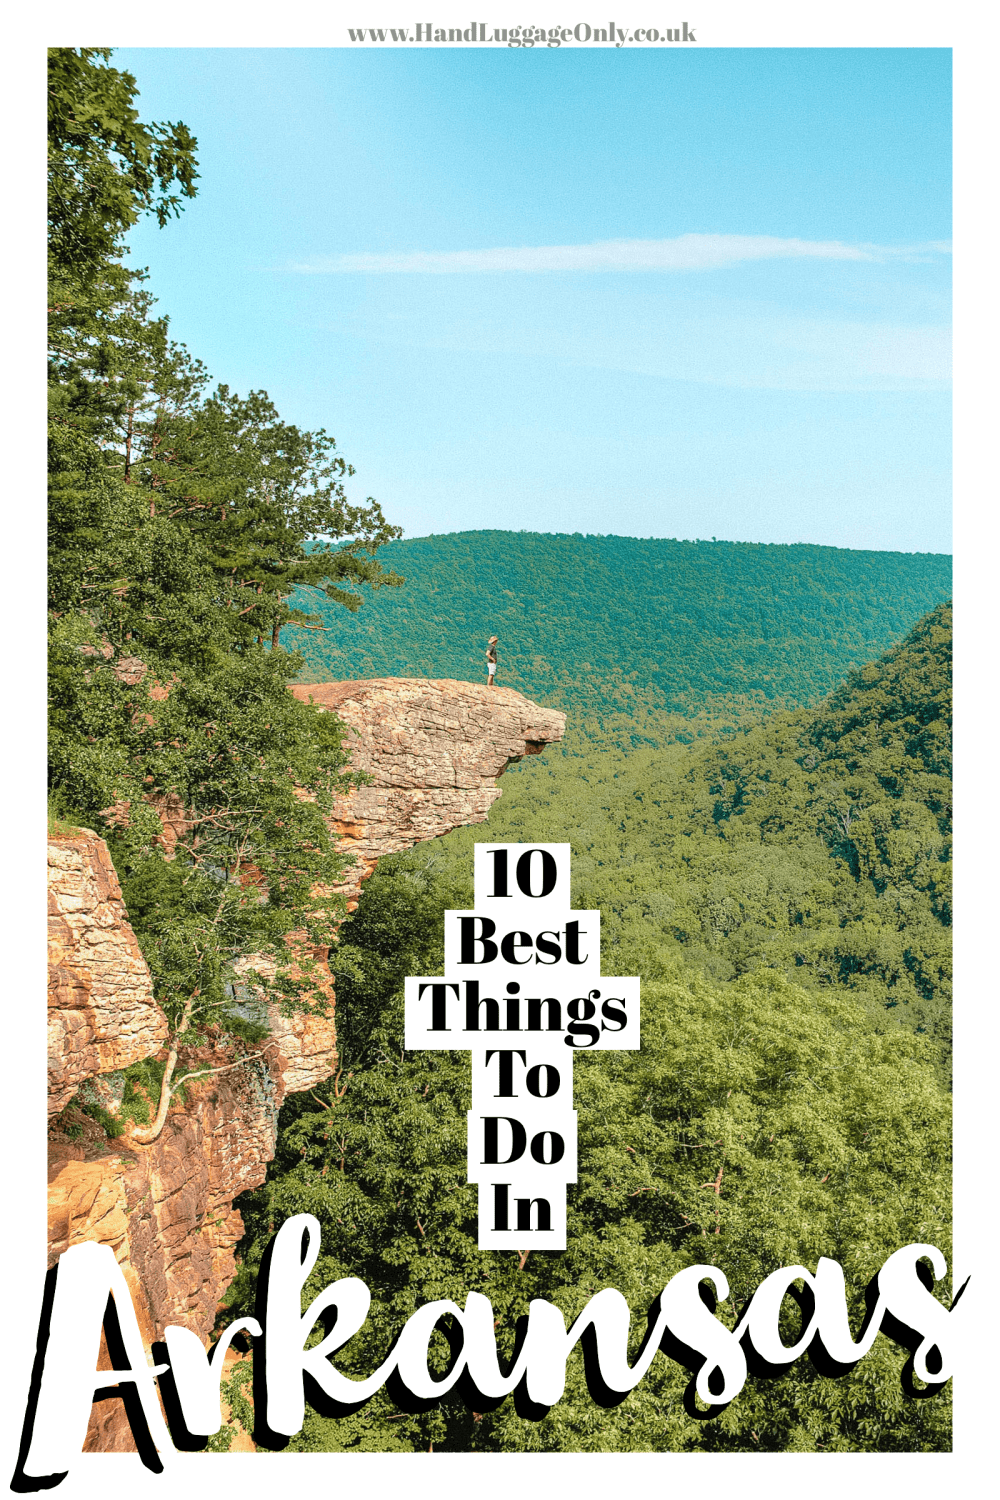 Best Things To Do In Arkansas (1)